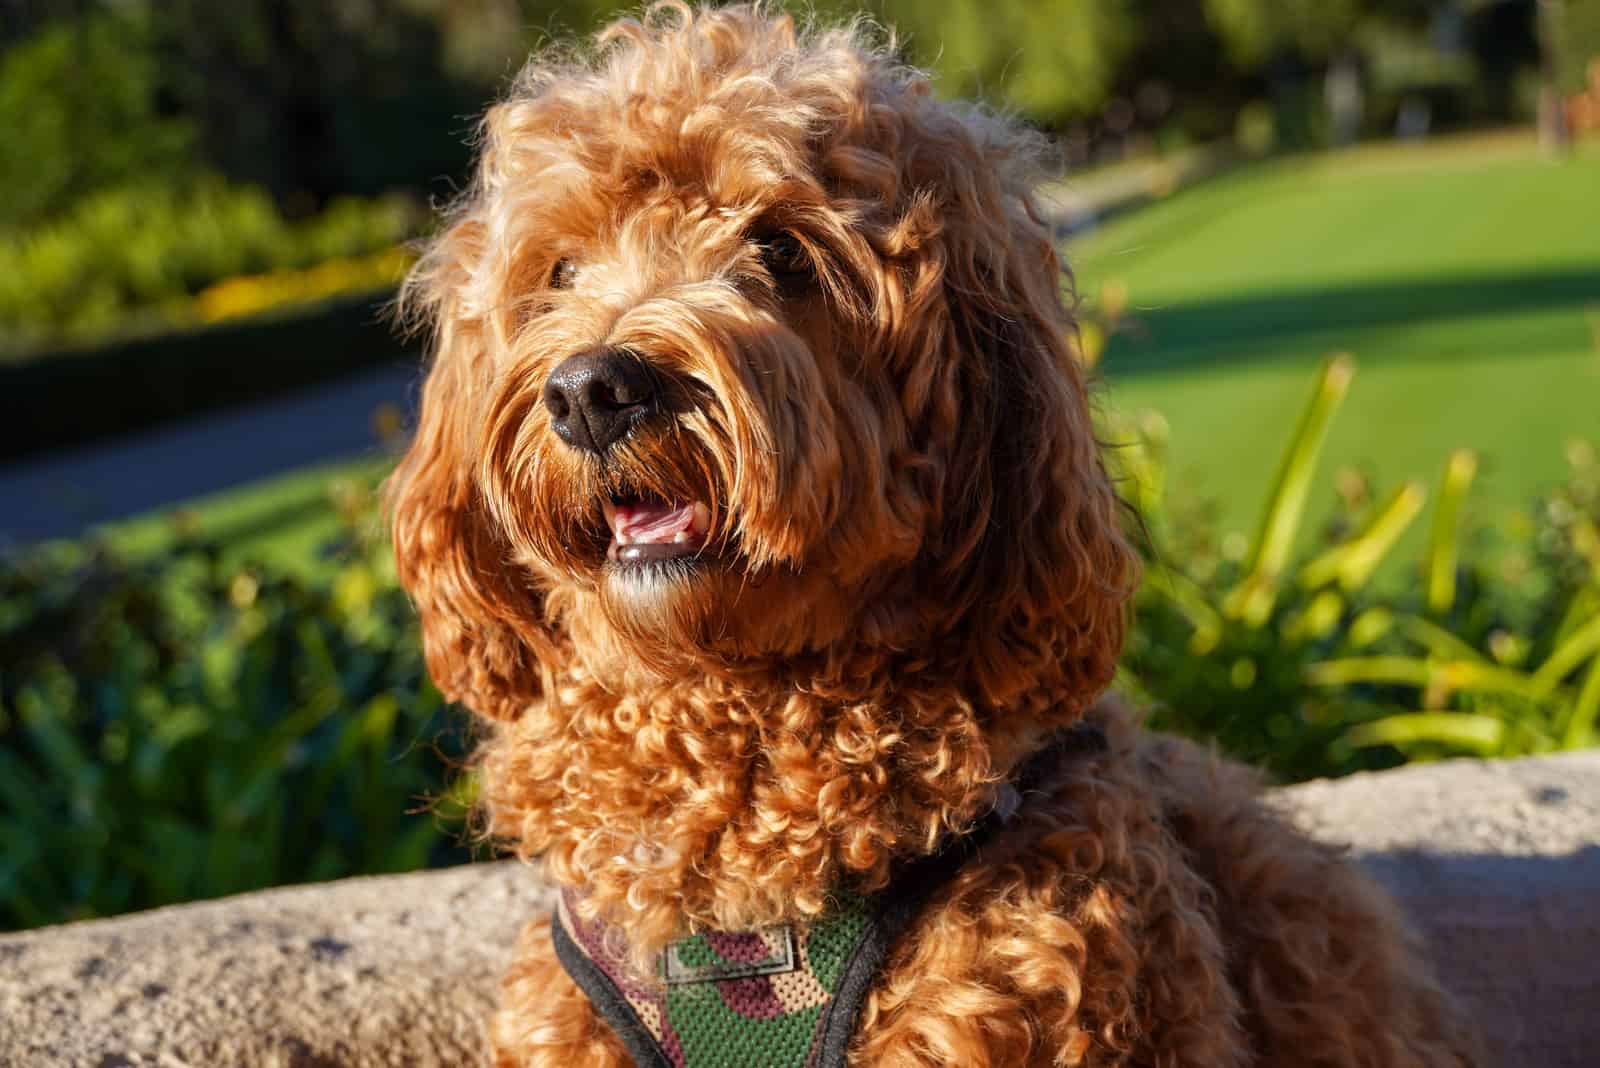 Cavapoo dog resting in the sun at the park